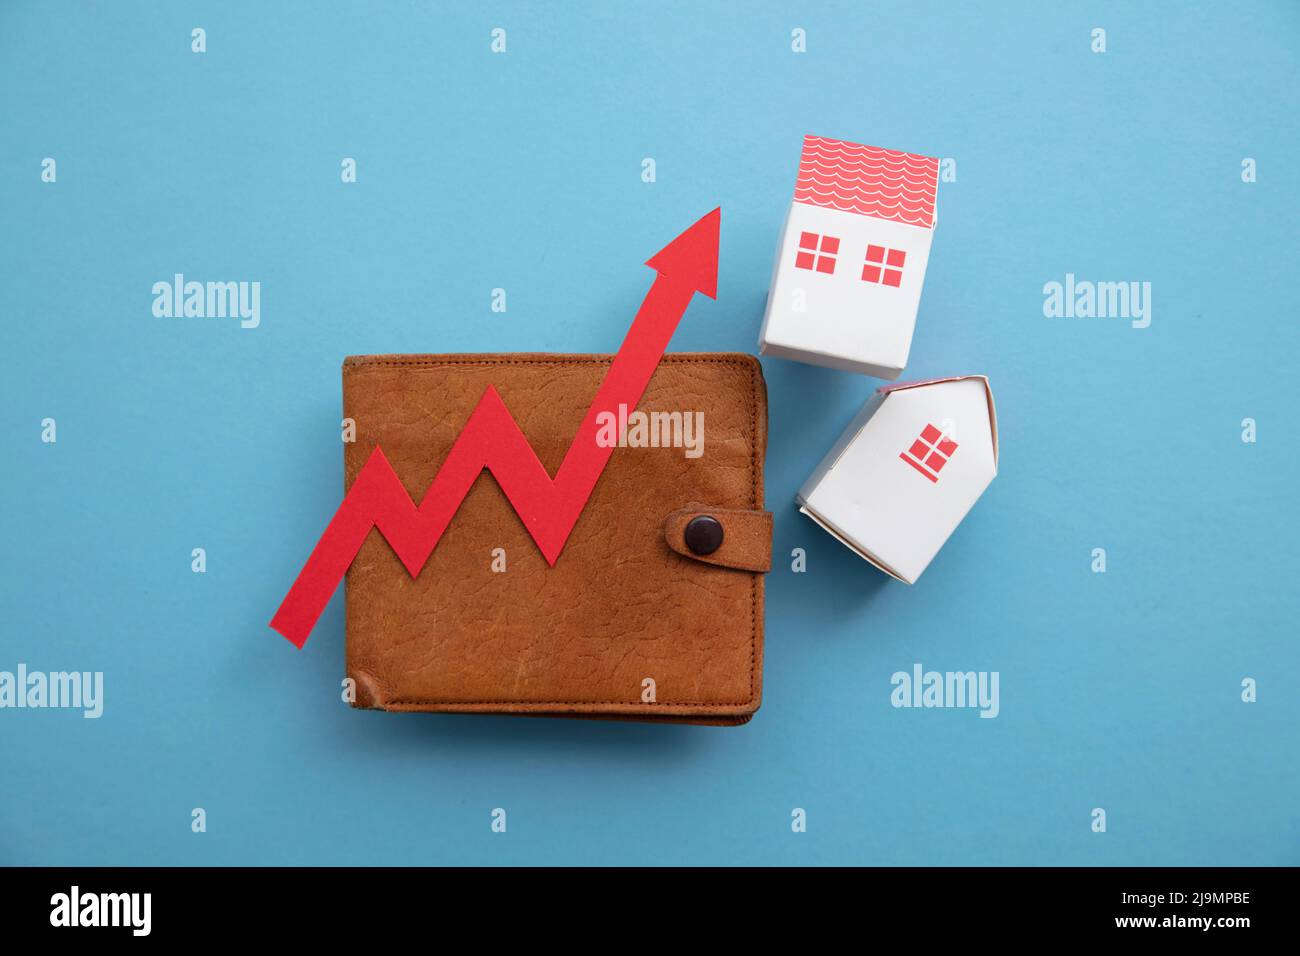 Rising cost of living. inflation financial crisis background Stock Photo